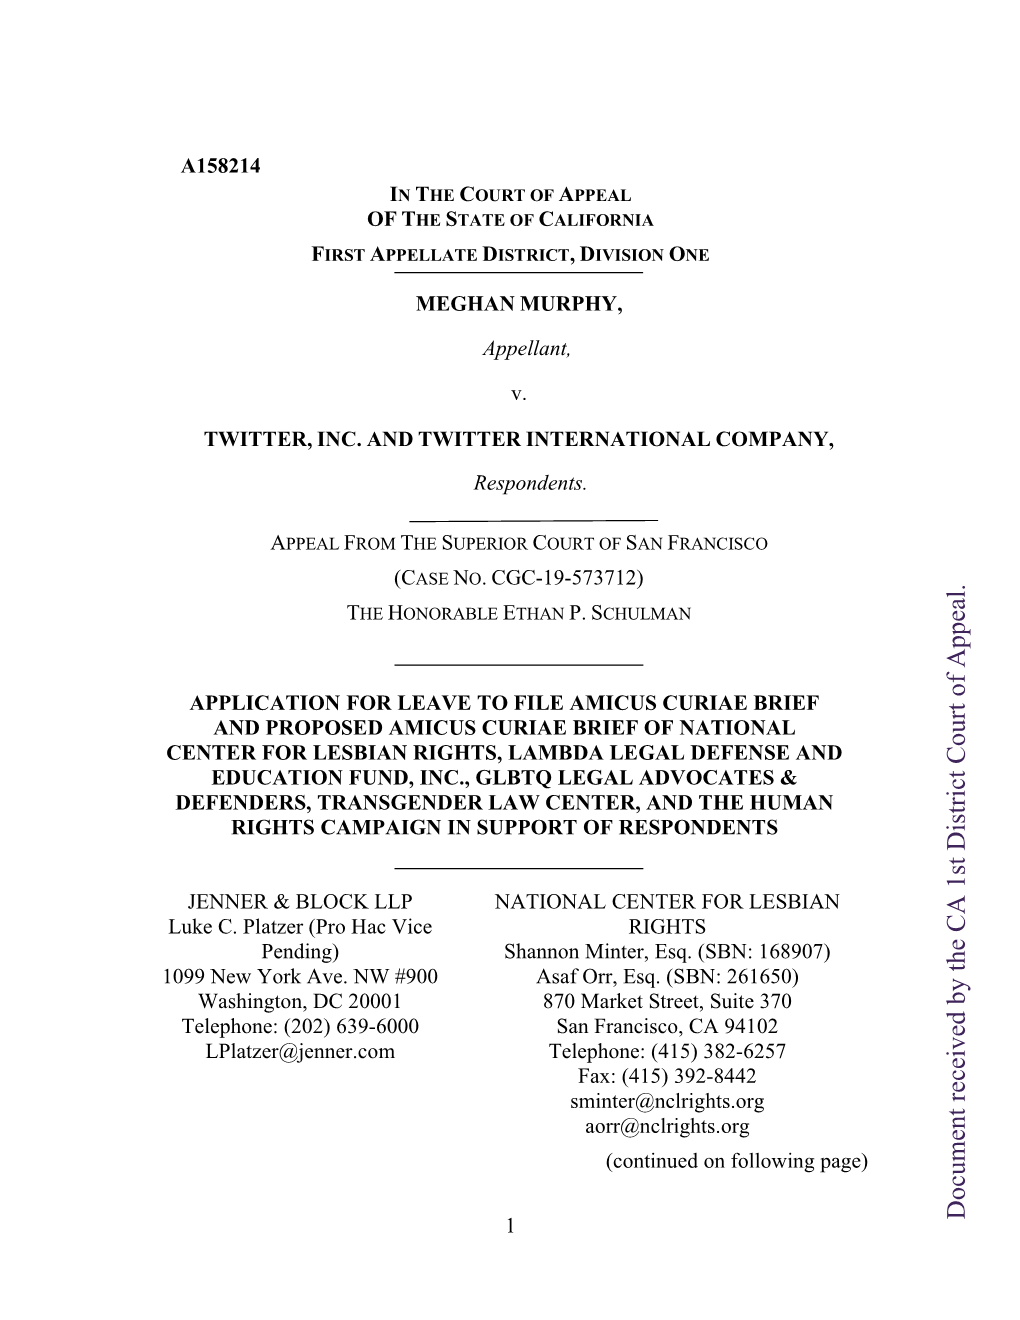 Amicus Brief in Support of Respondents